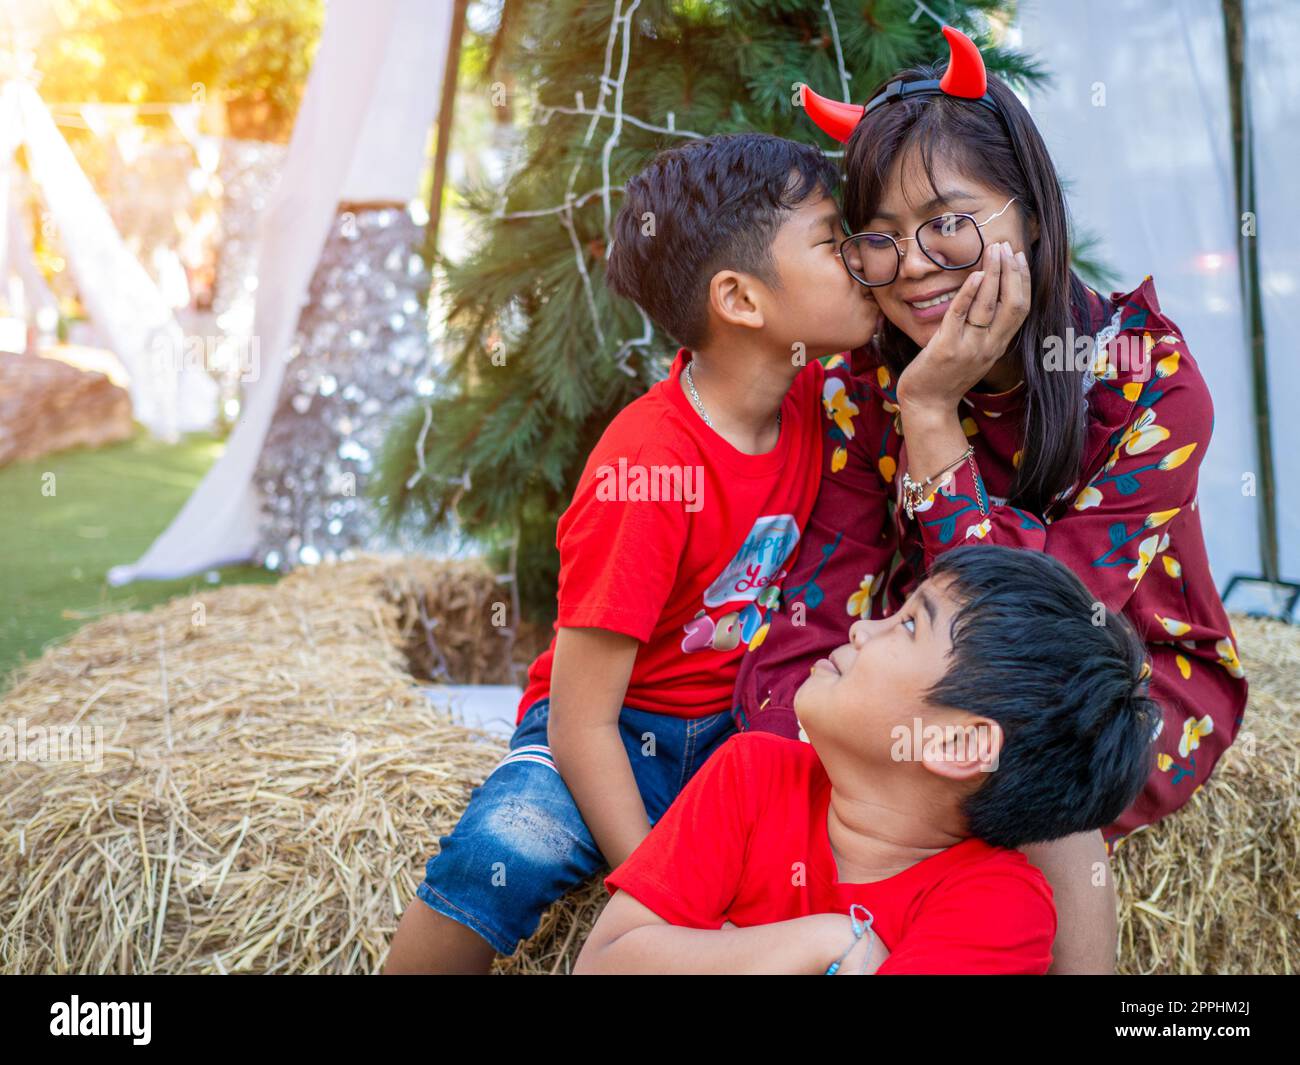 Mother and daughter dressed in red celebrating Christmas. Christmas Festival. Stock Photo